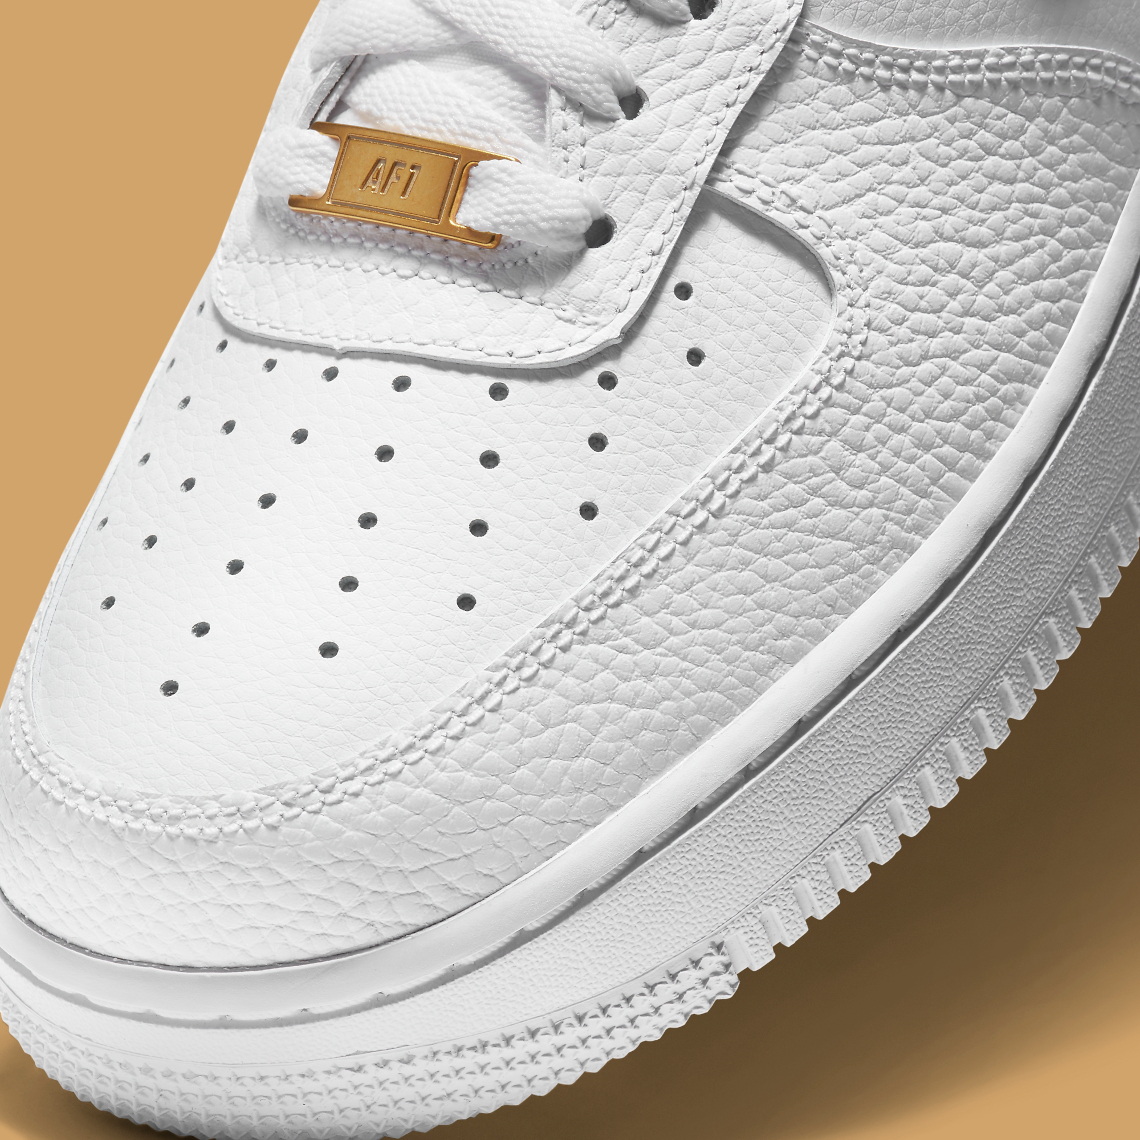 Nike’s White-On-White Air Force 1 Gets Tumbled Leather Uppers And Gold ...